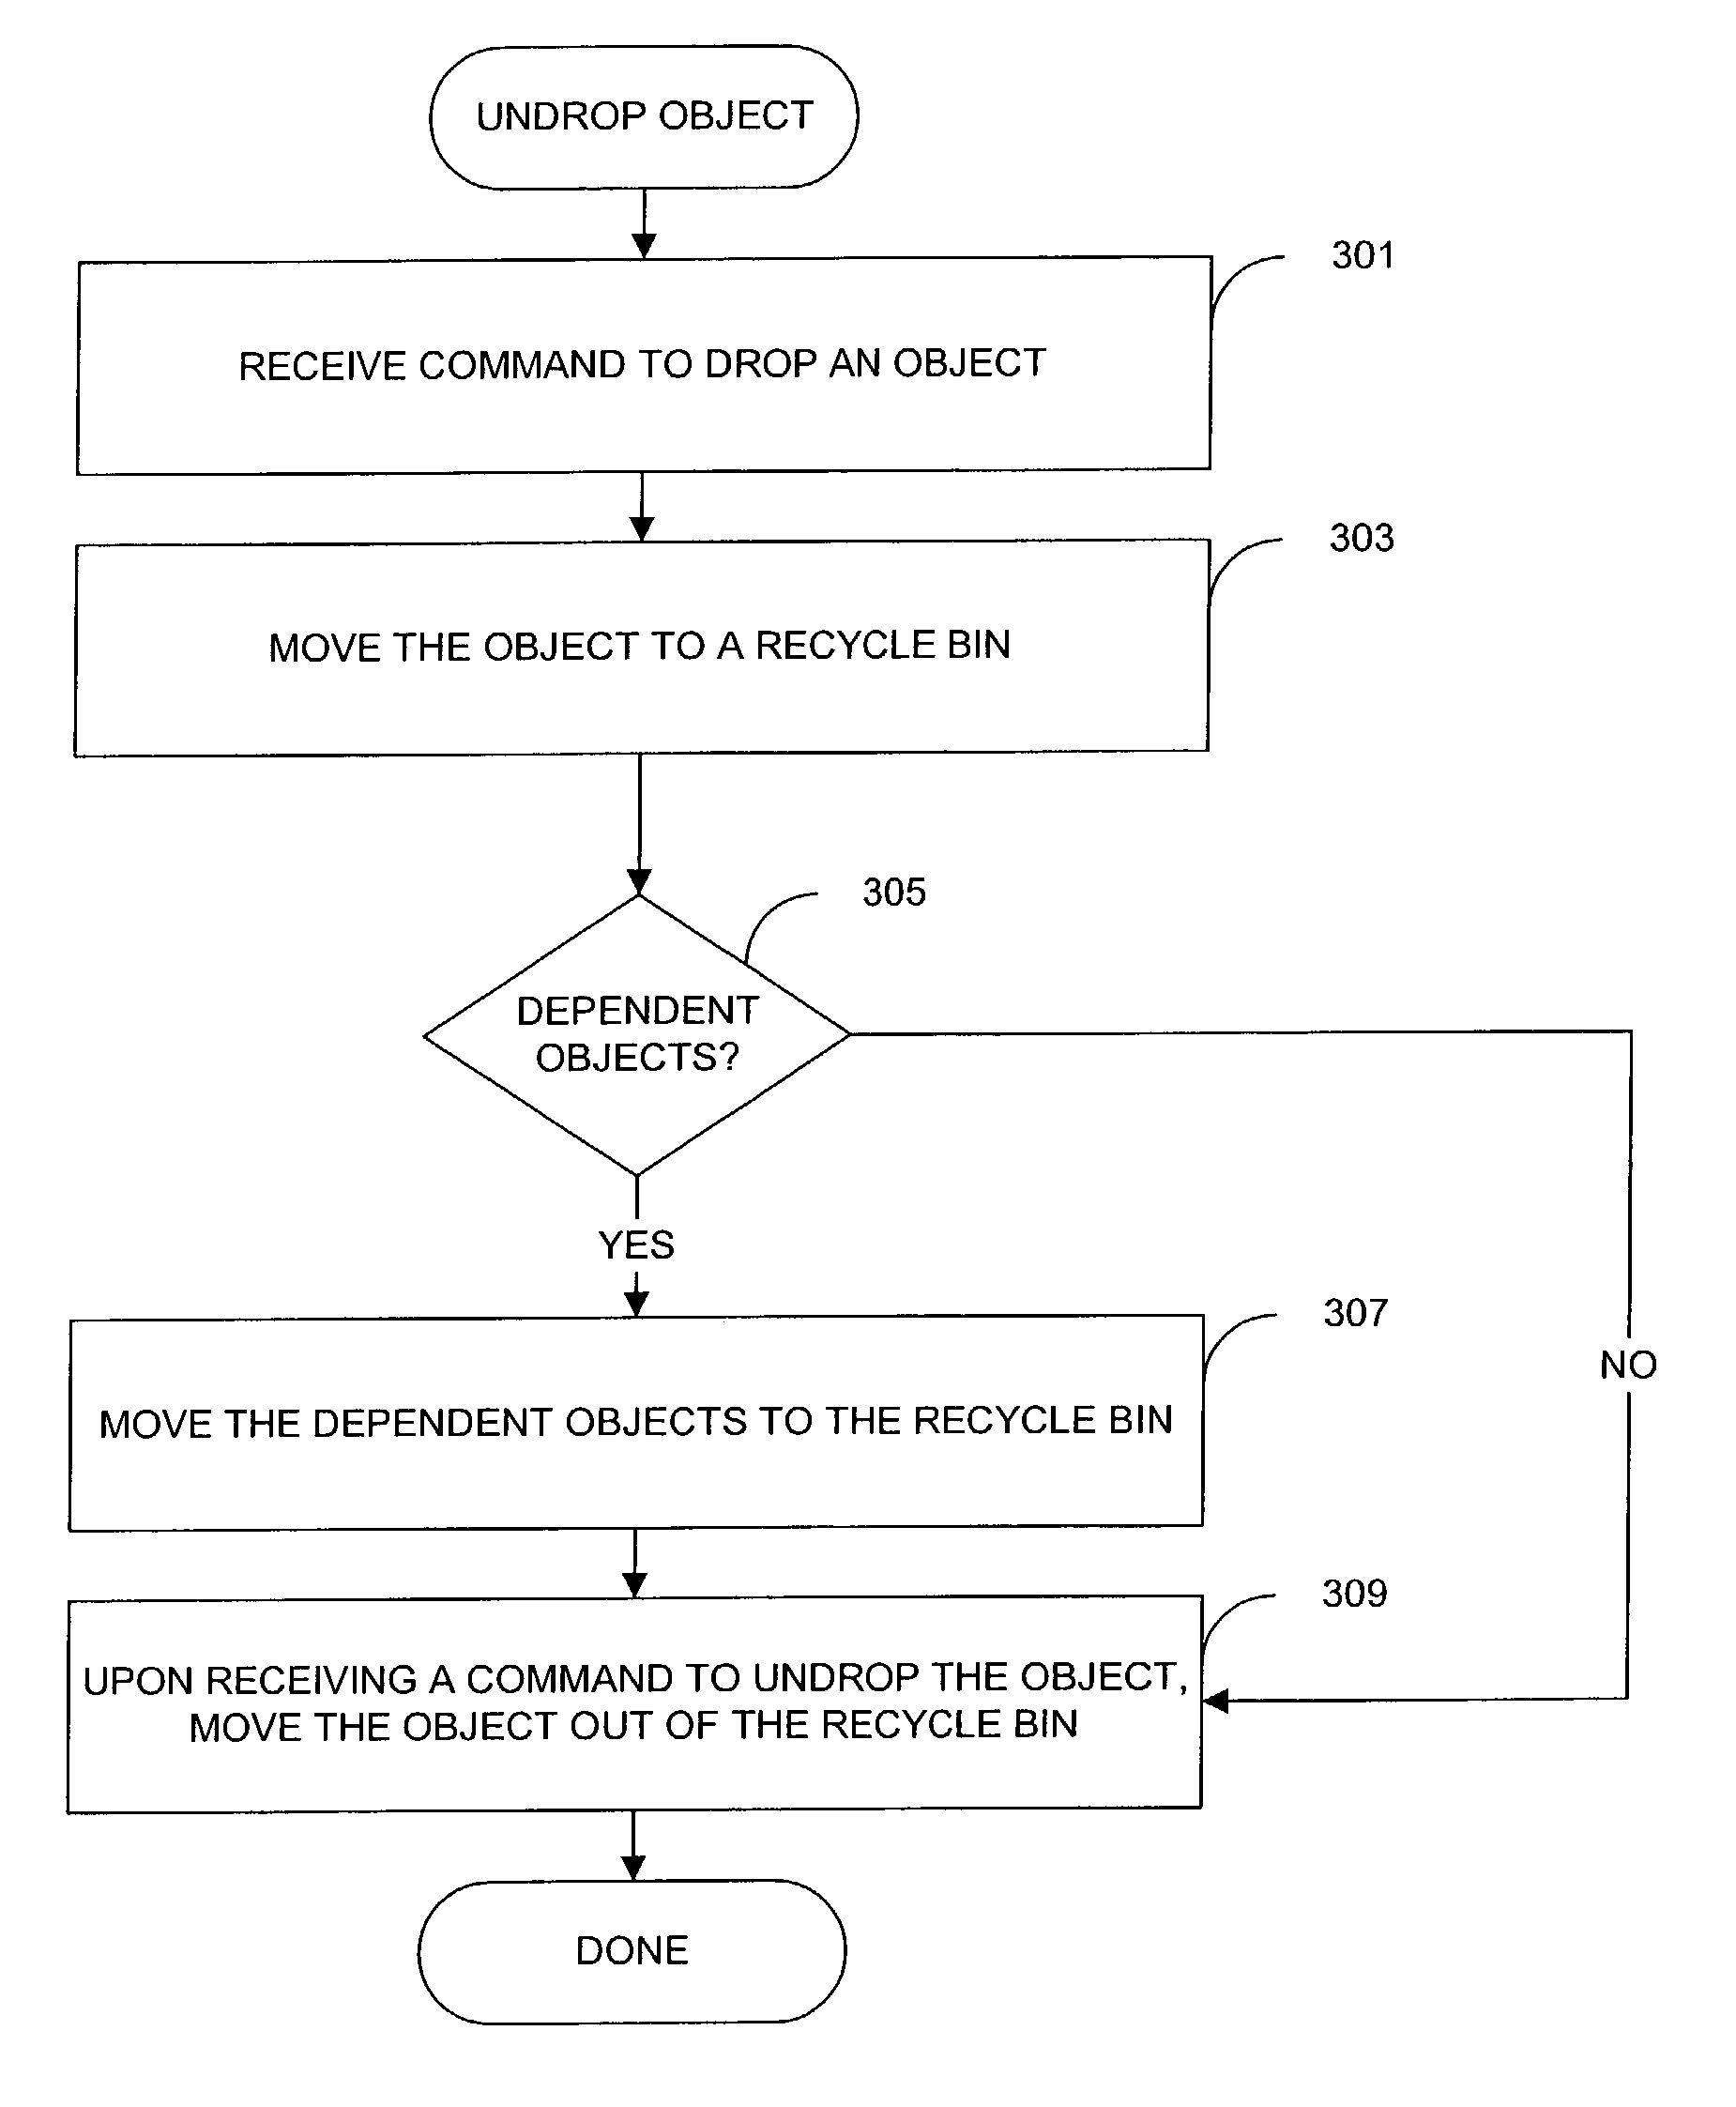 Undrop objects and dependent objects in a database system